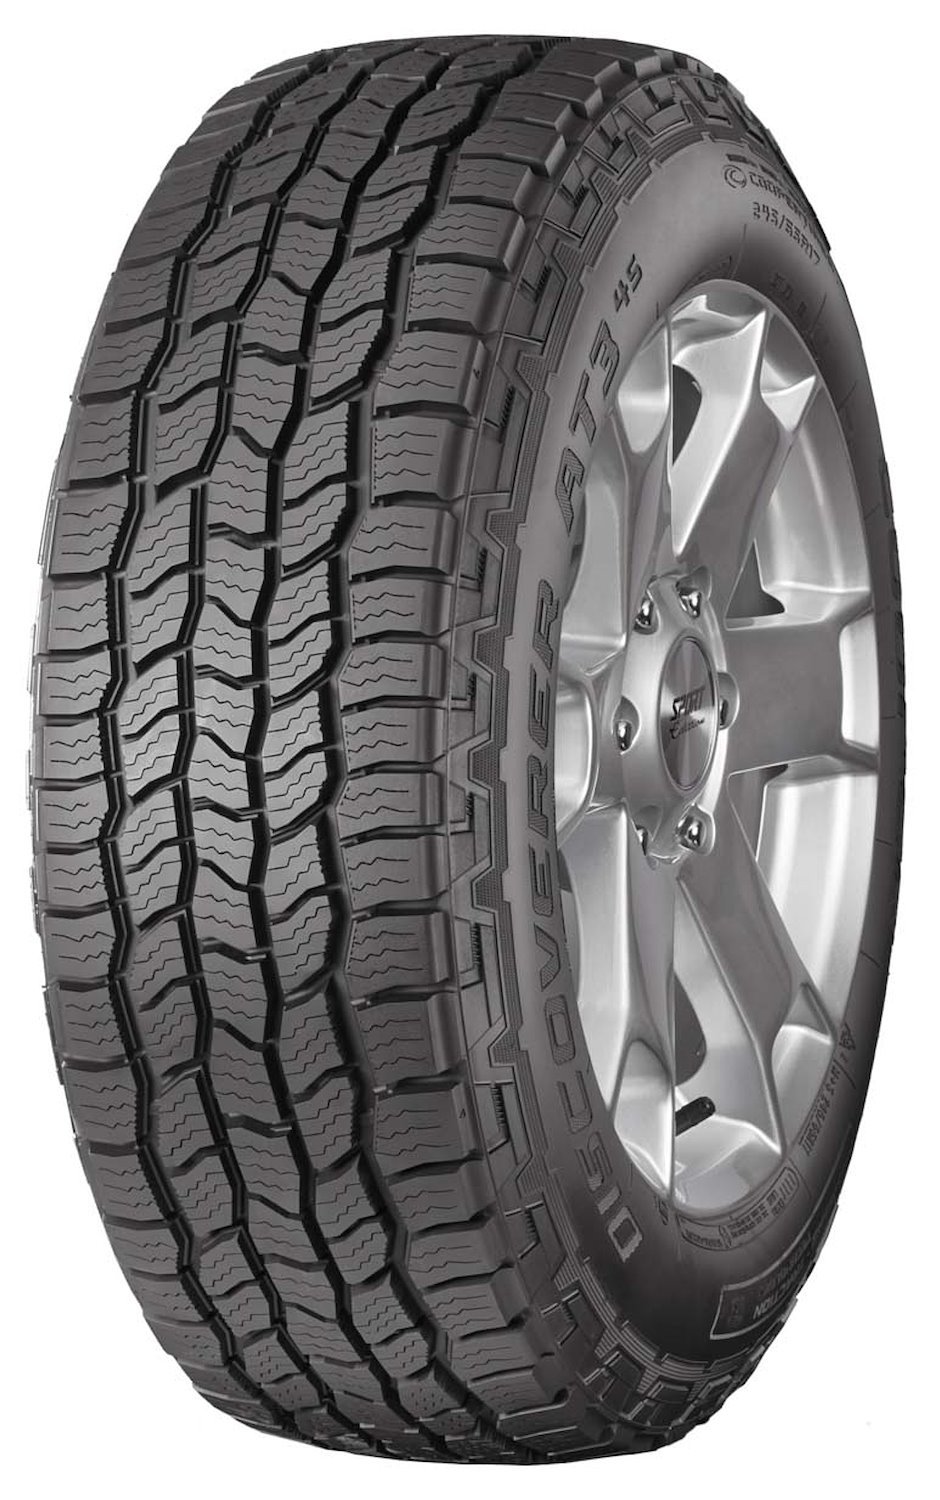 Discoverer AT3 4S All-Terrain Tire, 235/75R17